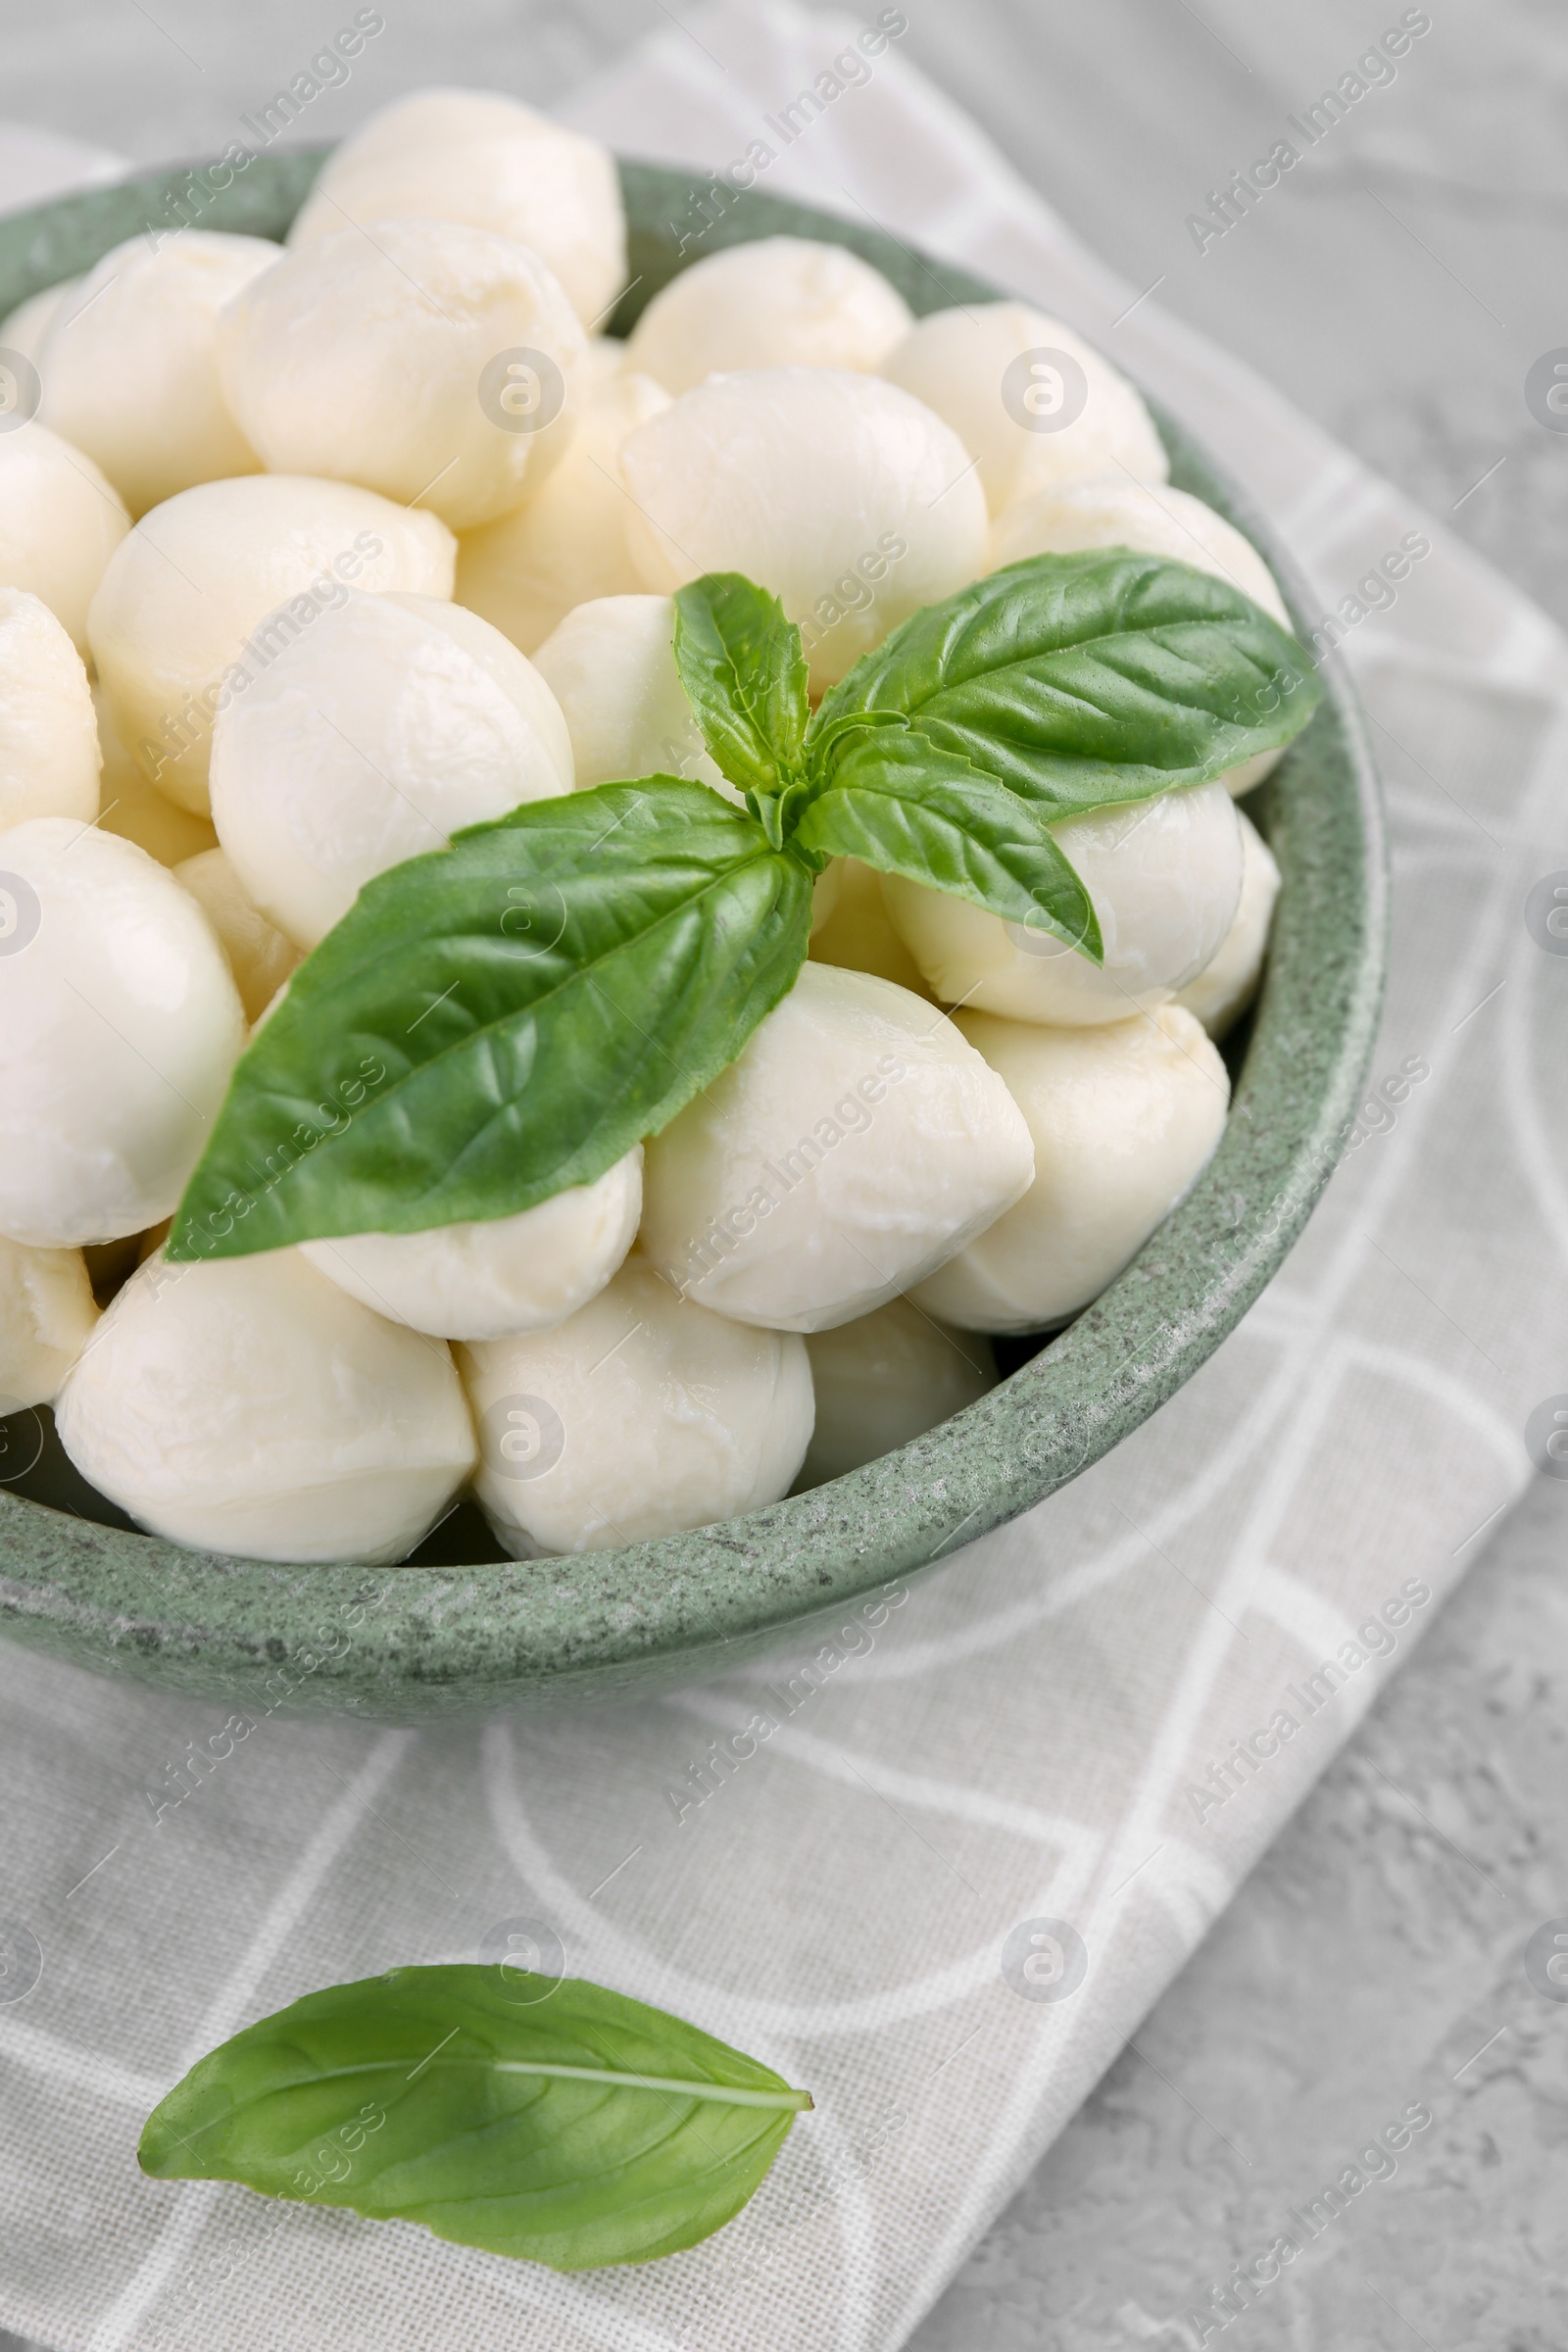 Photo of Tasty mozzarella balls and basil leaves in bowl on grey table